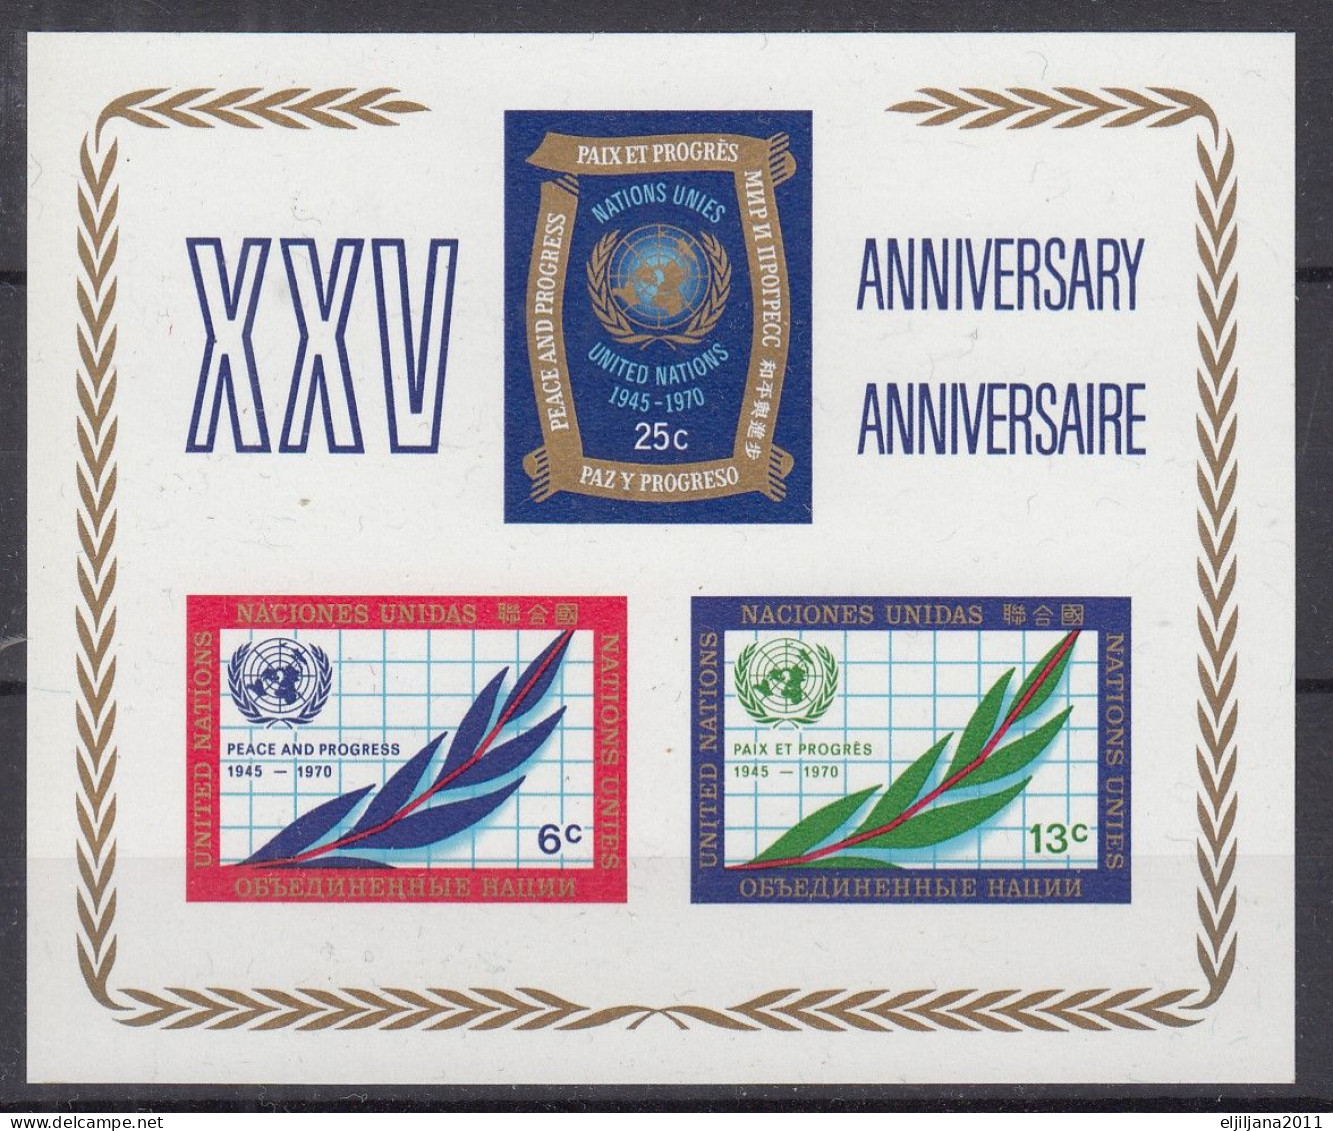 Action !! SALE !! 50 % OFF !! ⁕ UN 1970 New York ⁕ United Nations 25th Anniv. ⁕ MNH & FDC Used Block 5 - Ongebruikt